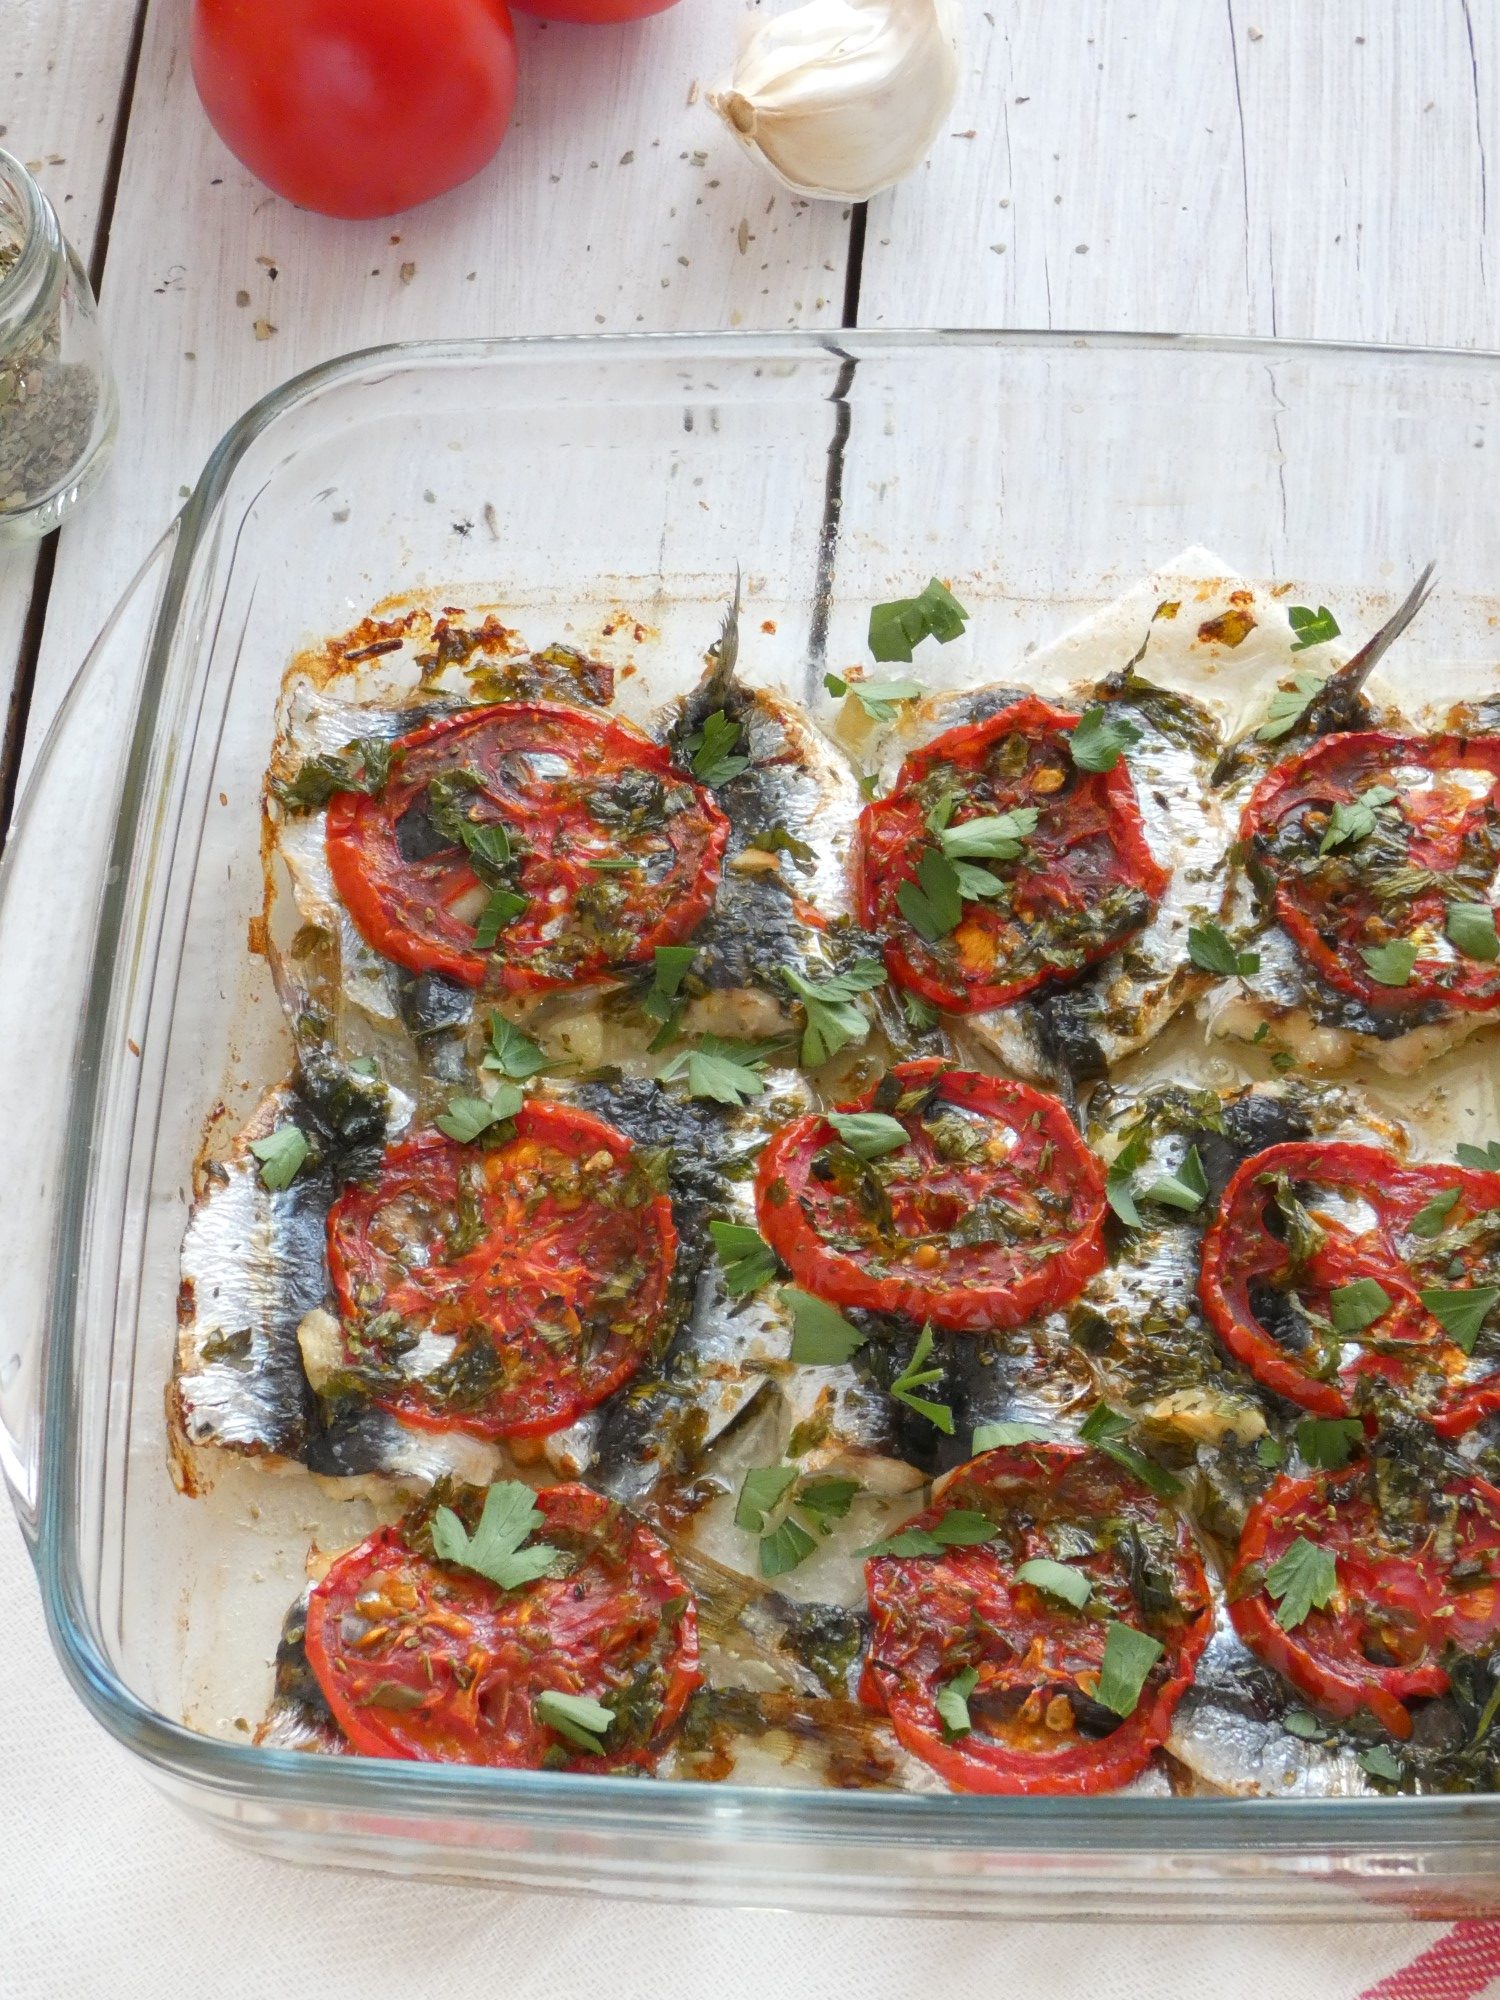 oven-baked sardines with tomato and parsley